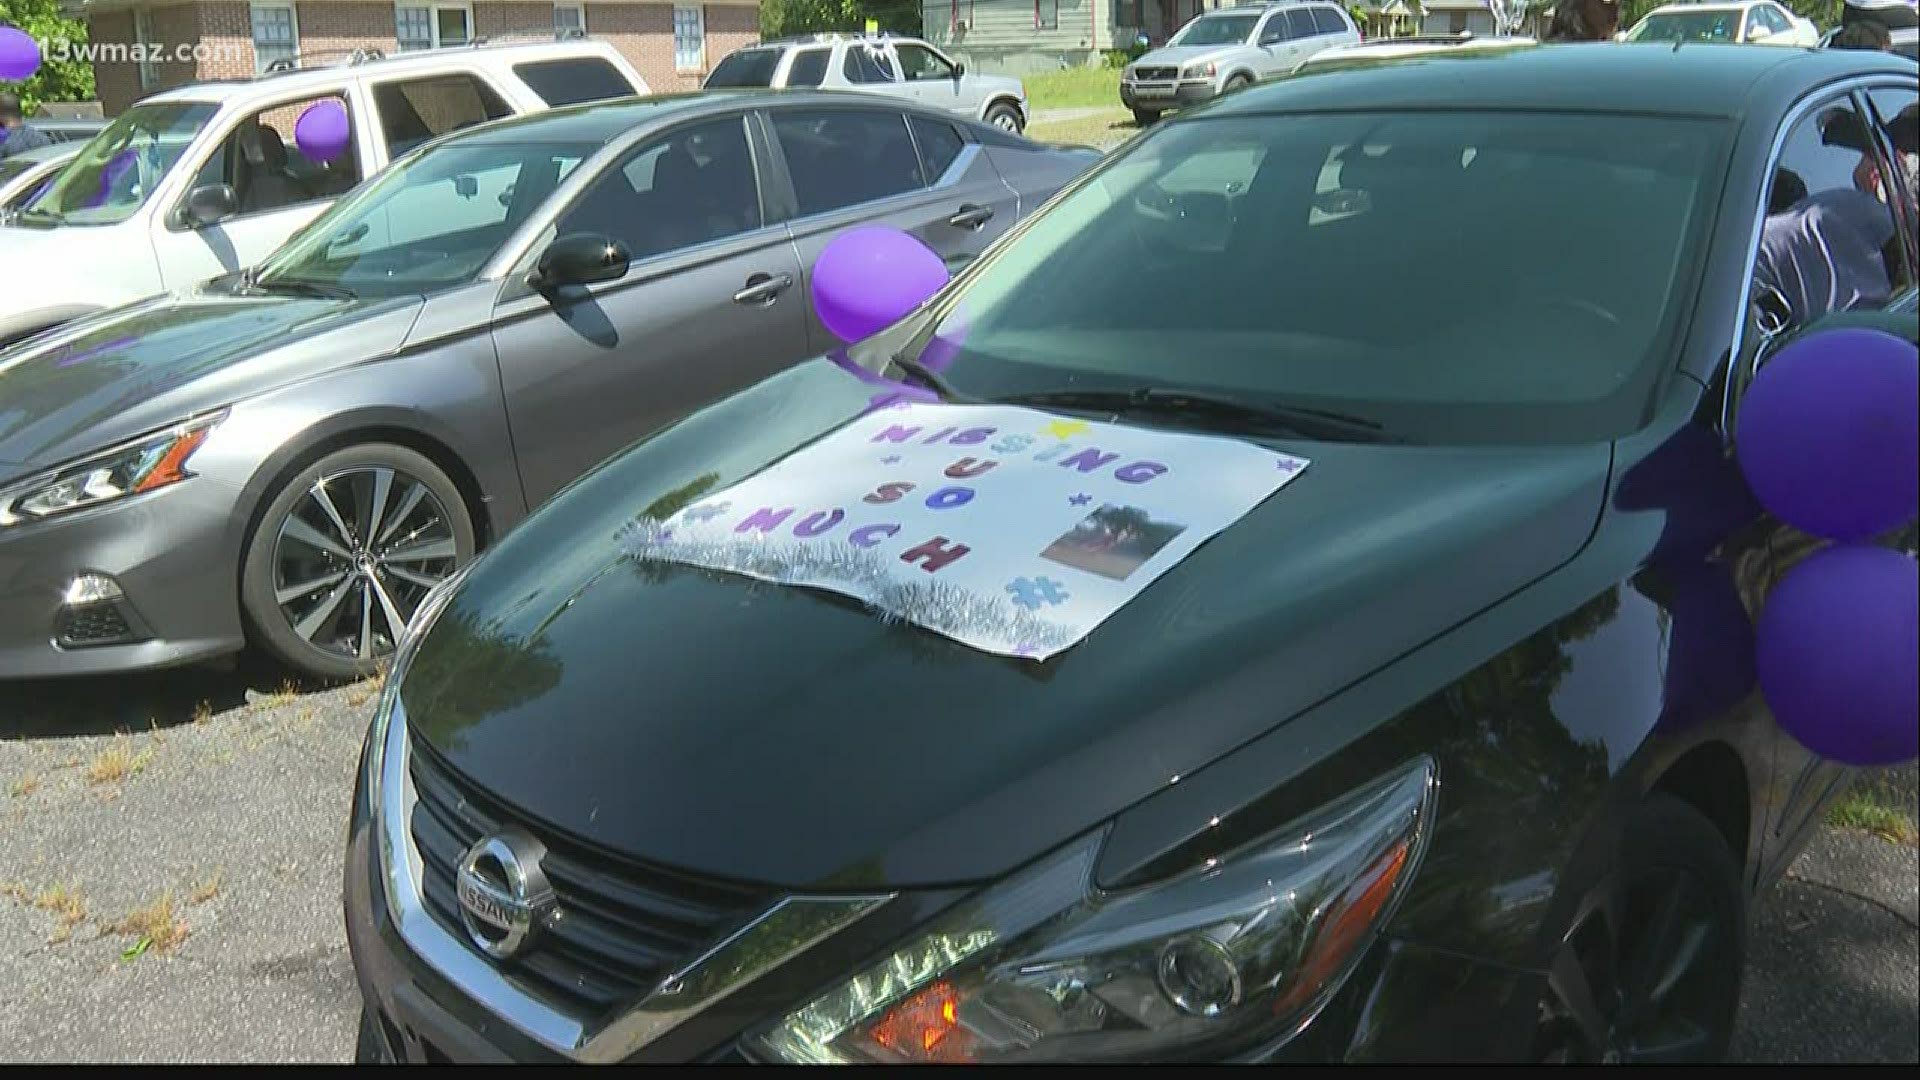 It's been five years since LaSmockie Fountain was found dead after a domestic dispute with her boyfriend. Saturday her family honored her with a drive-thru parade.